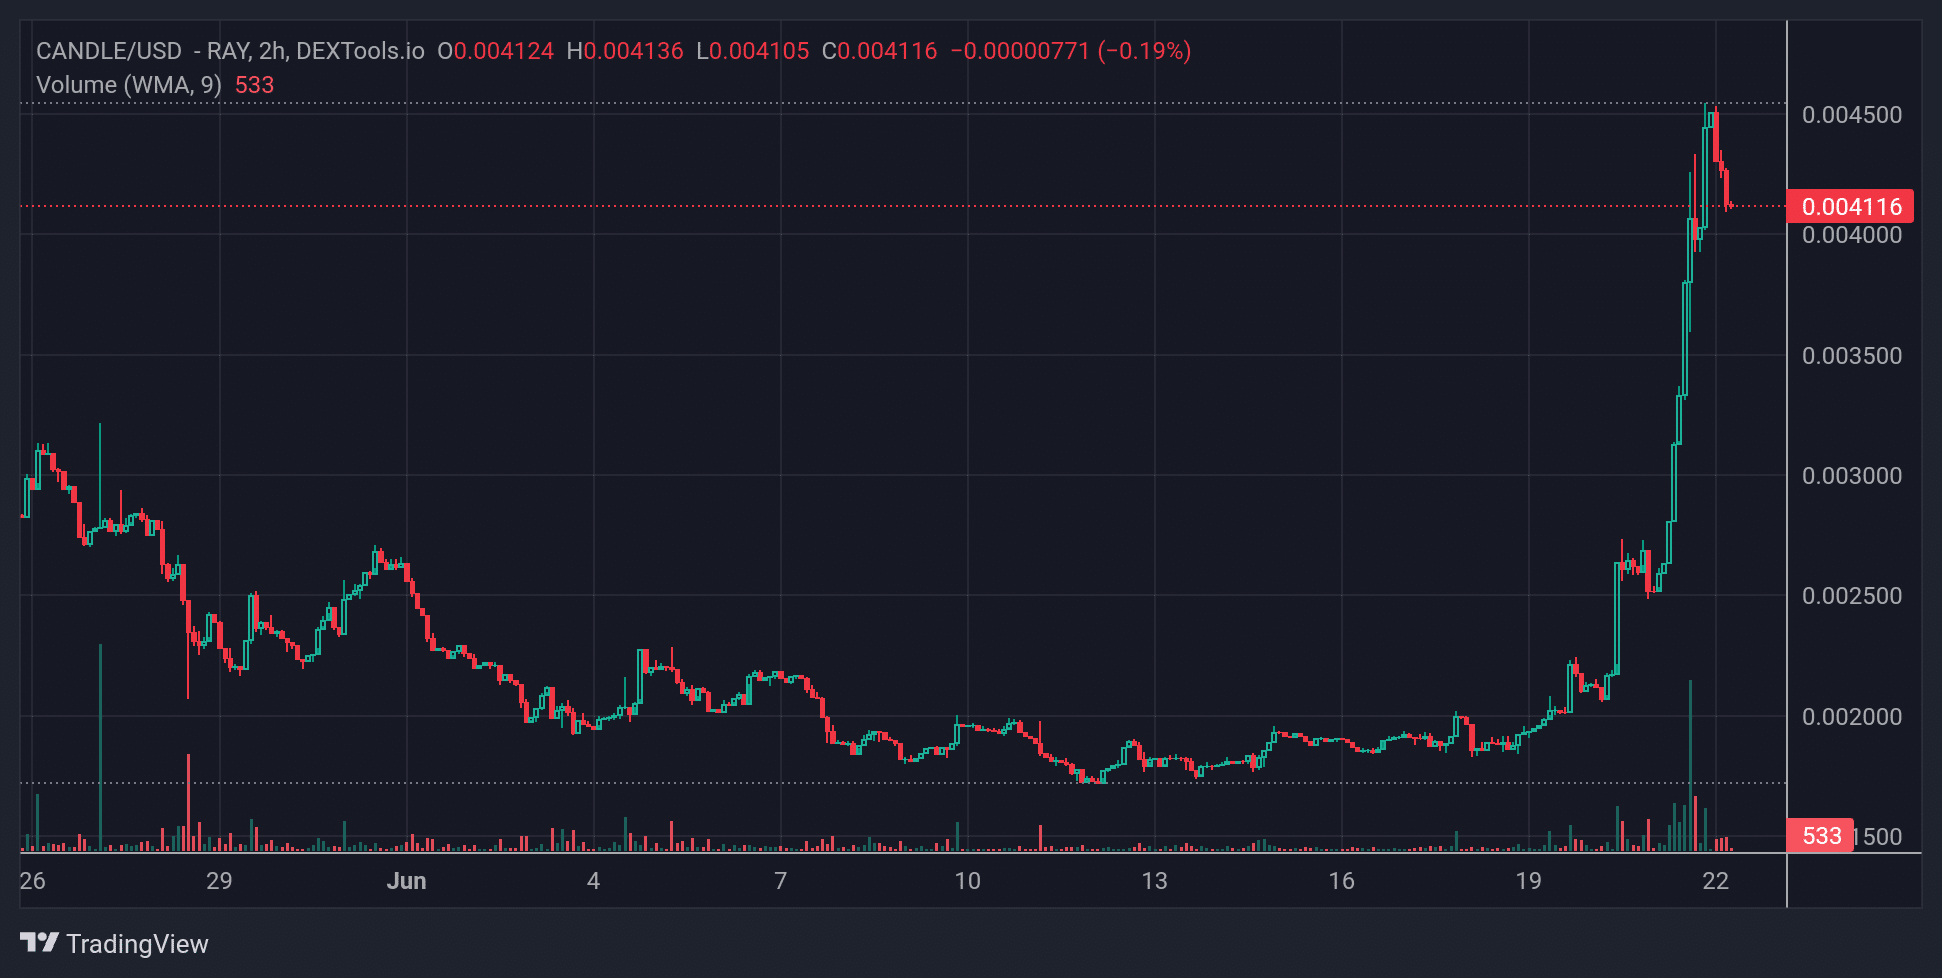 CANDLE Price Chart